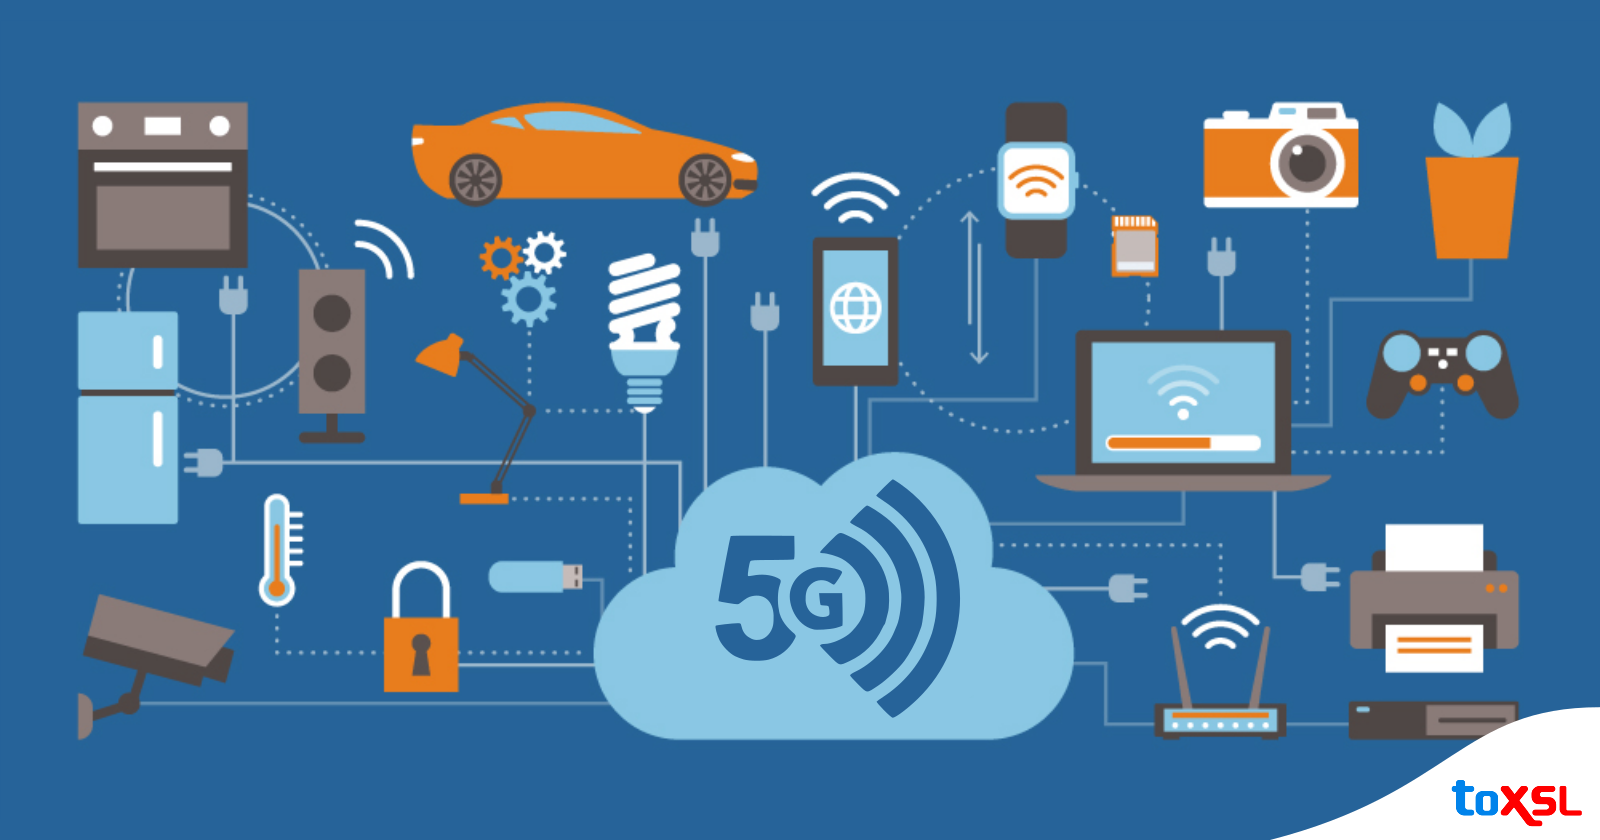 Impact of 5G on Internet of Things